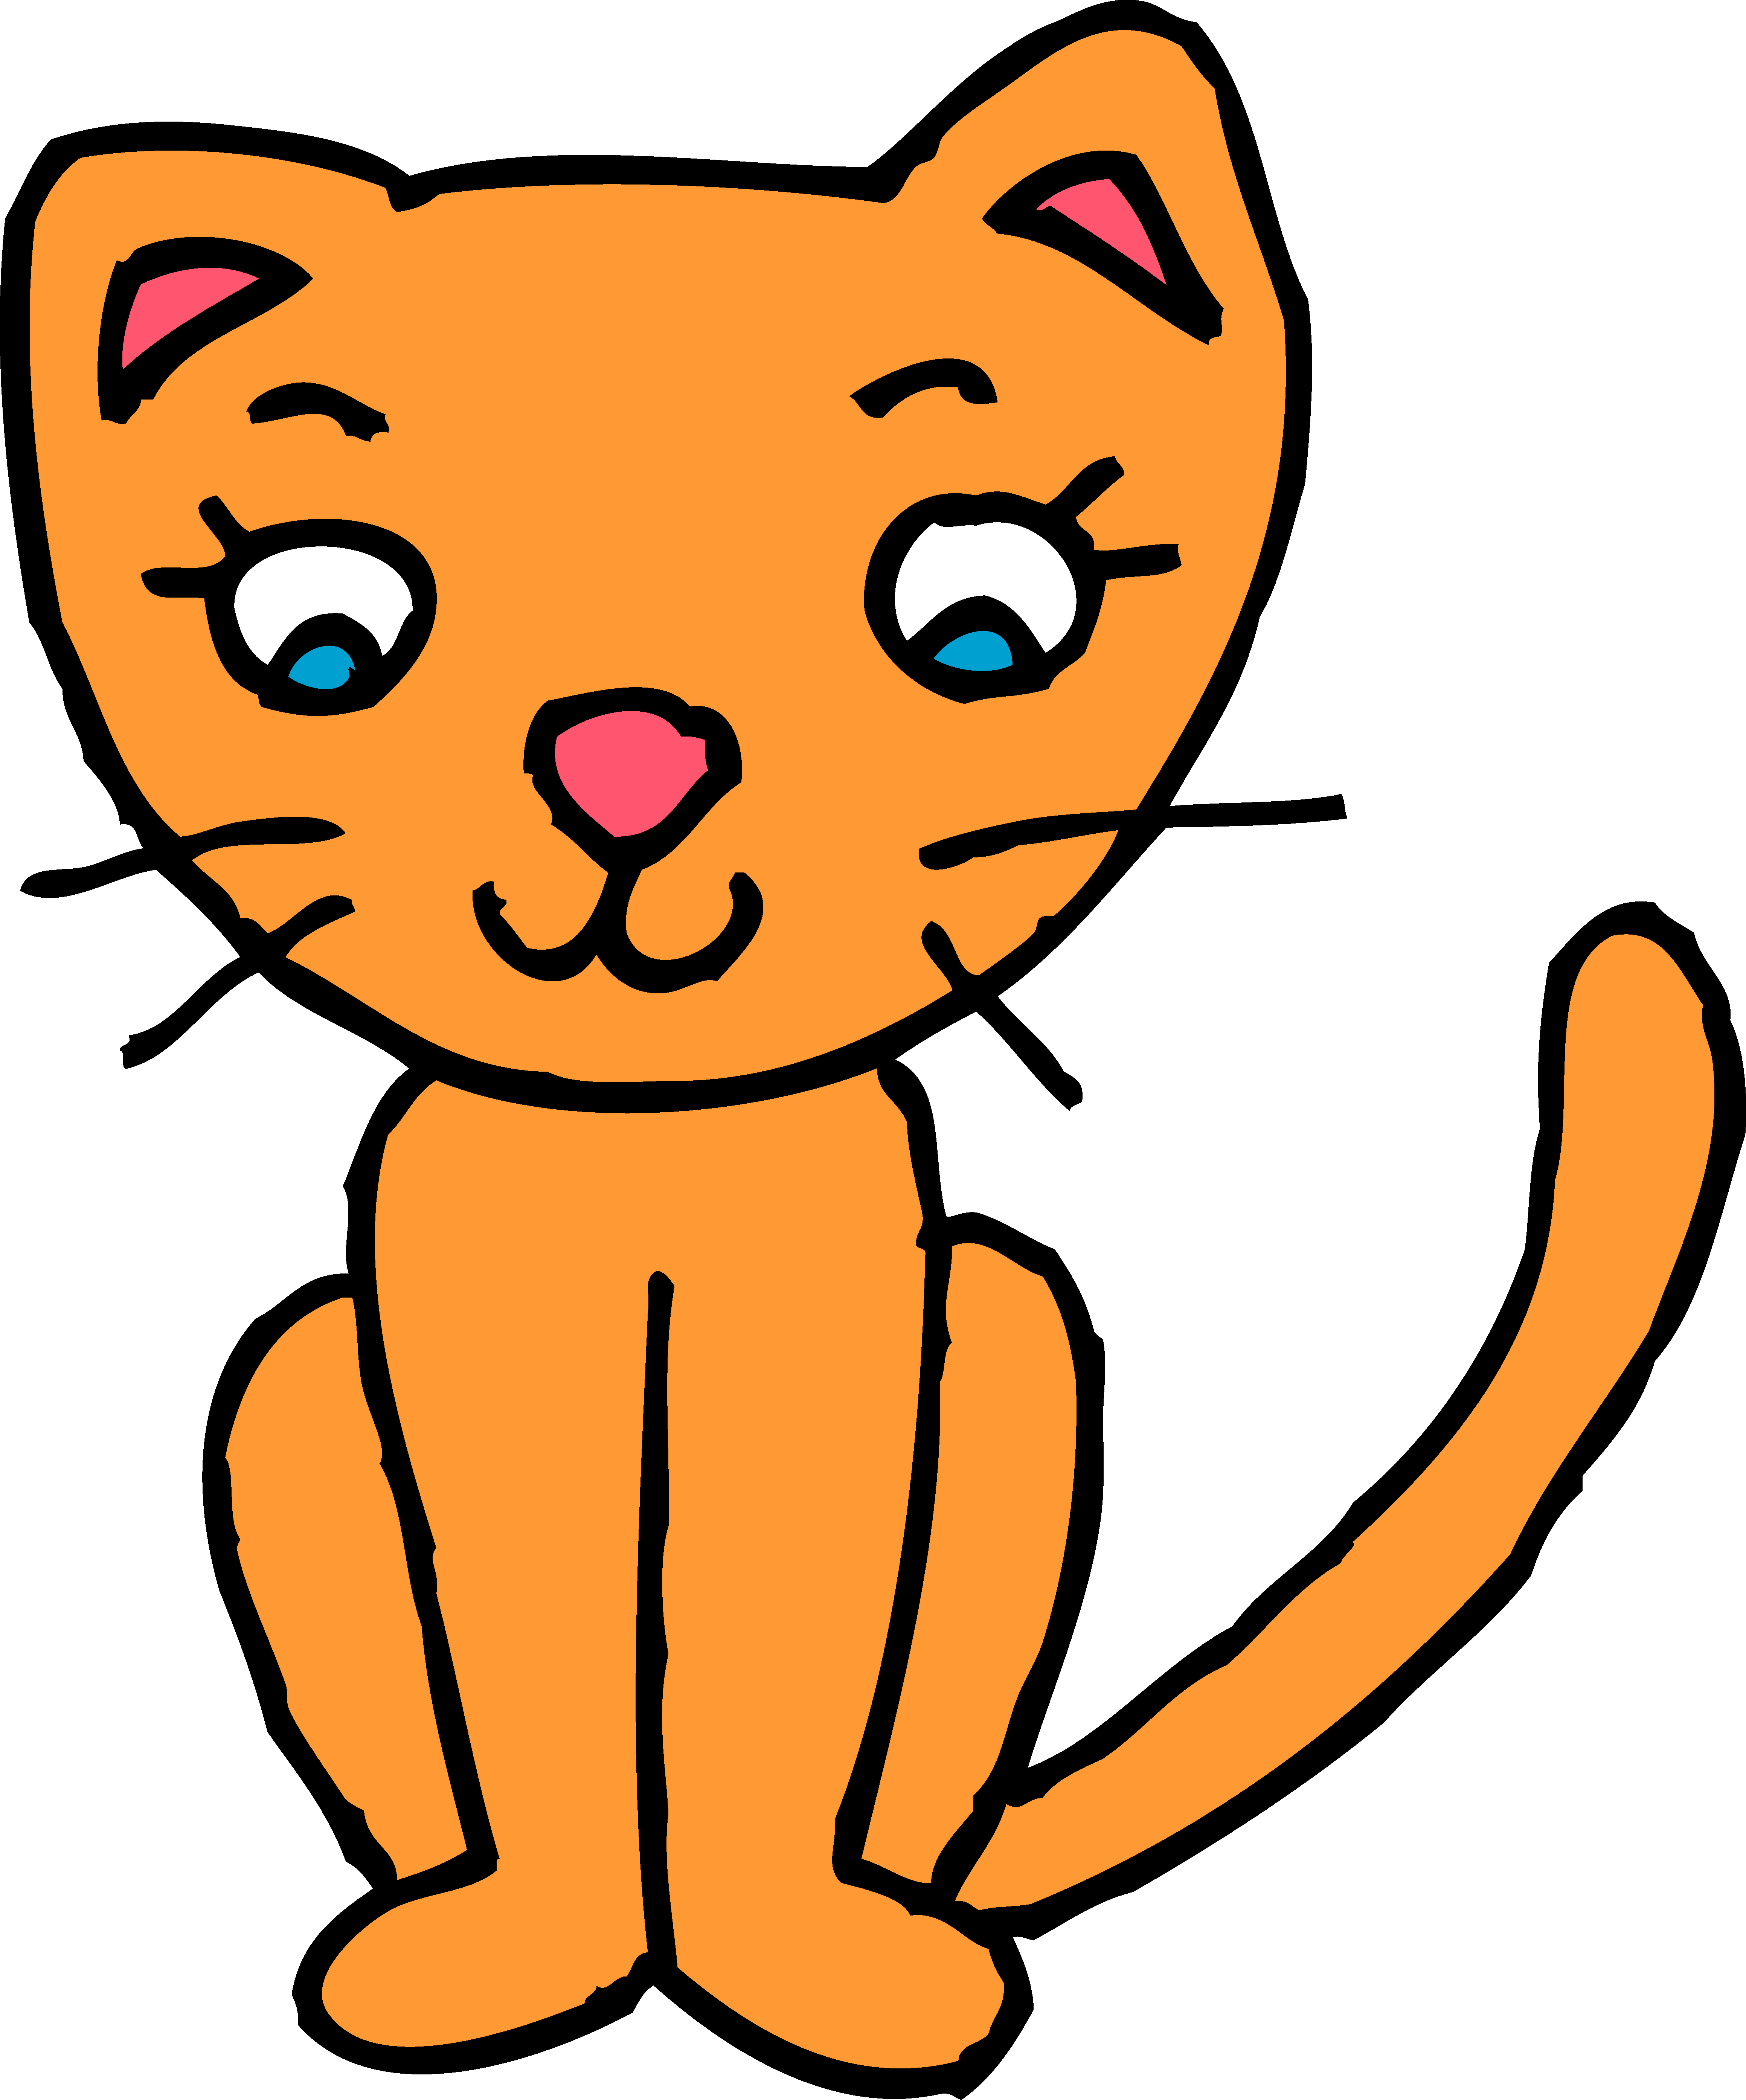 Cat with toy mouse clip art